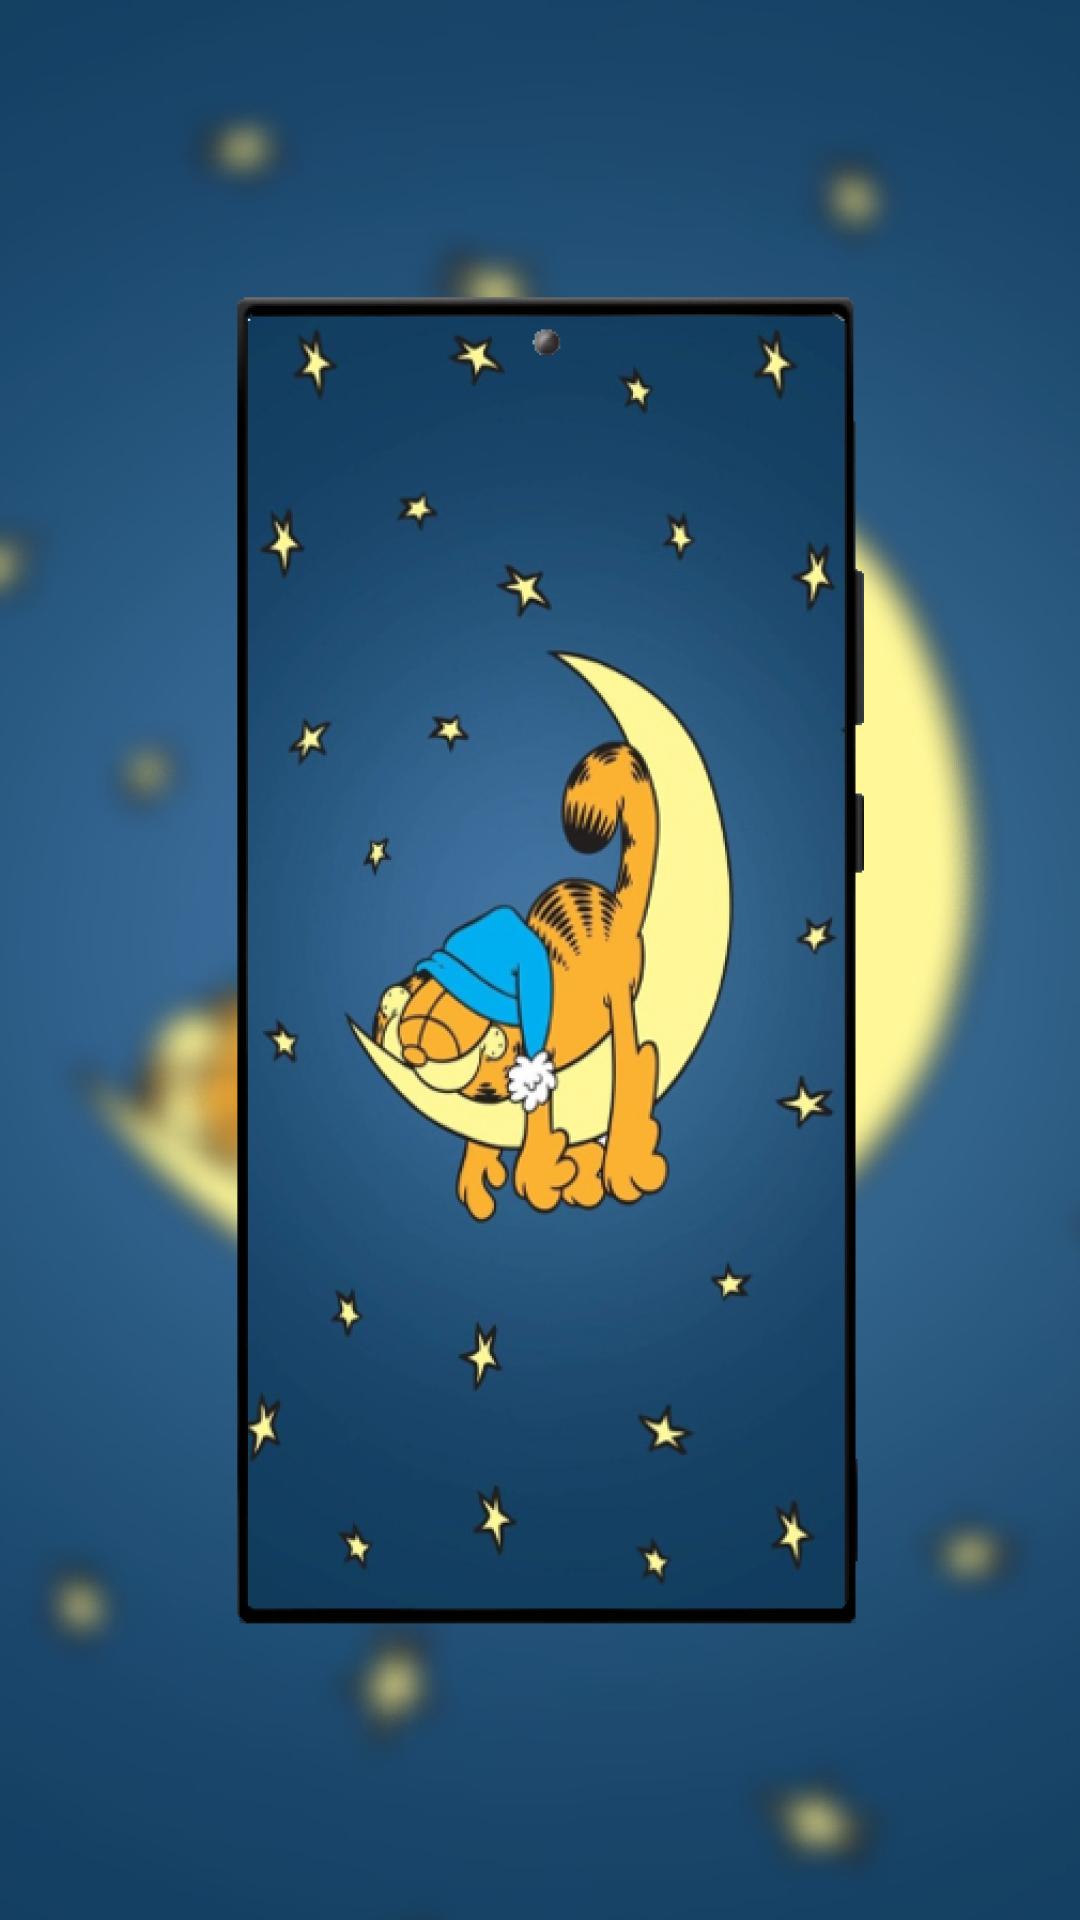 Garfield Wallpapers For Android Apk Download